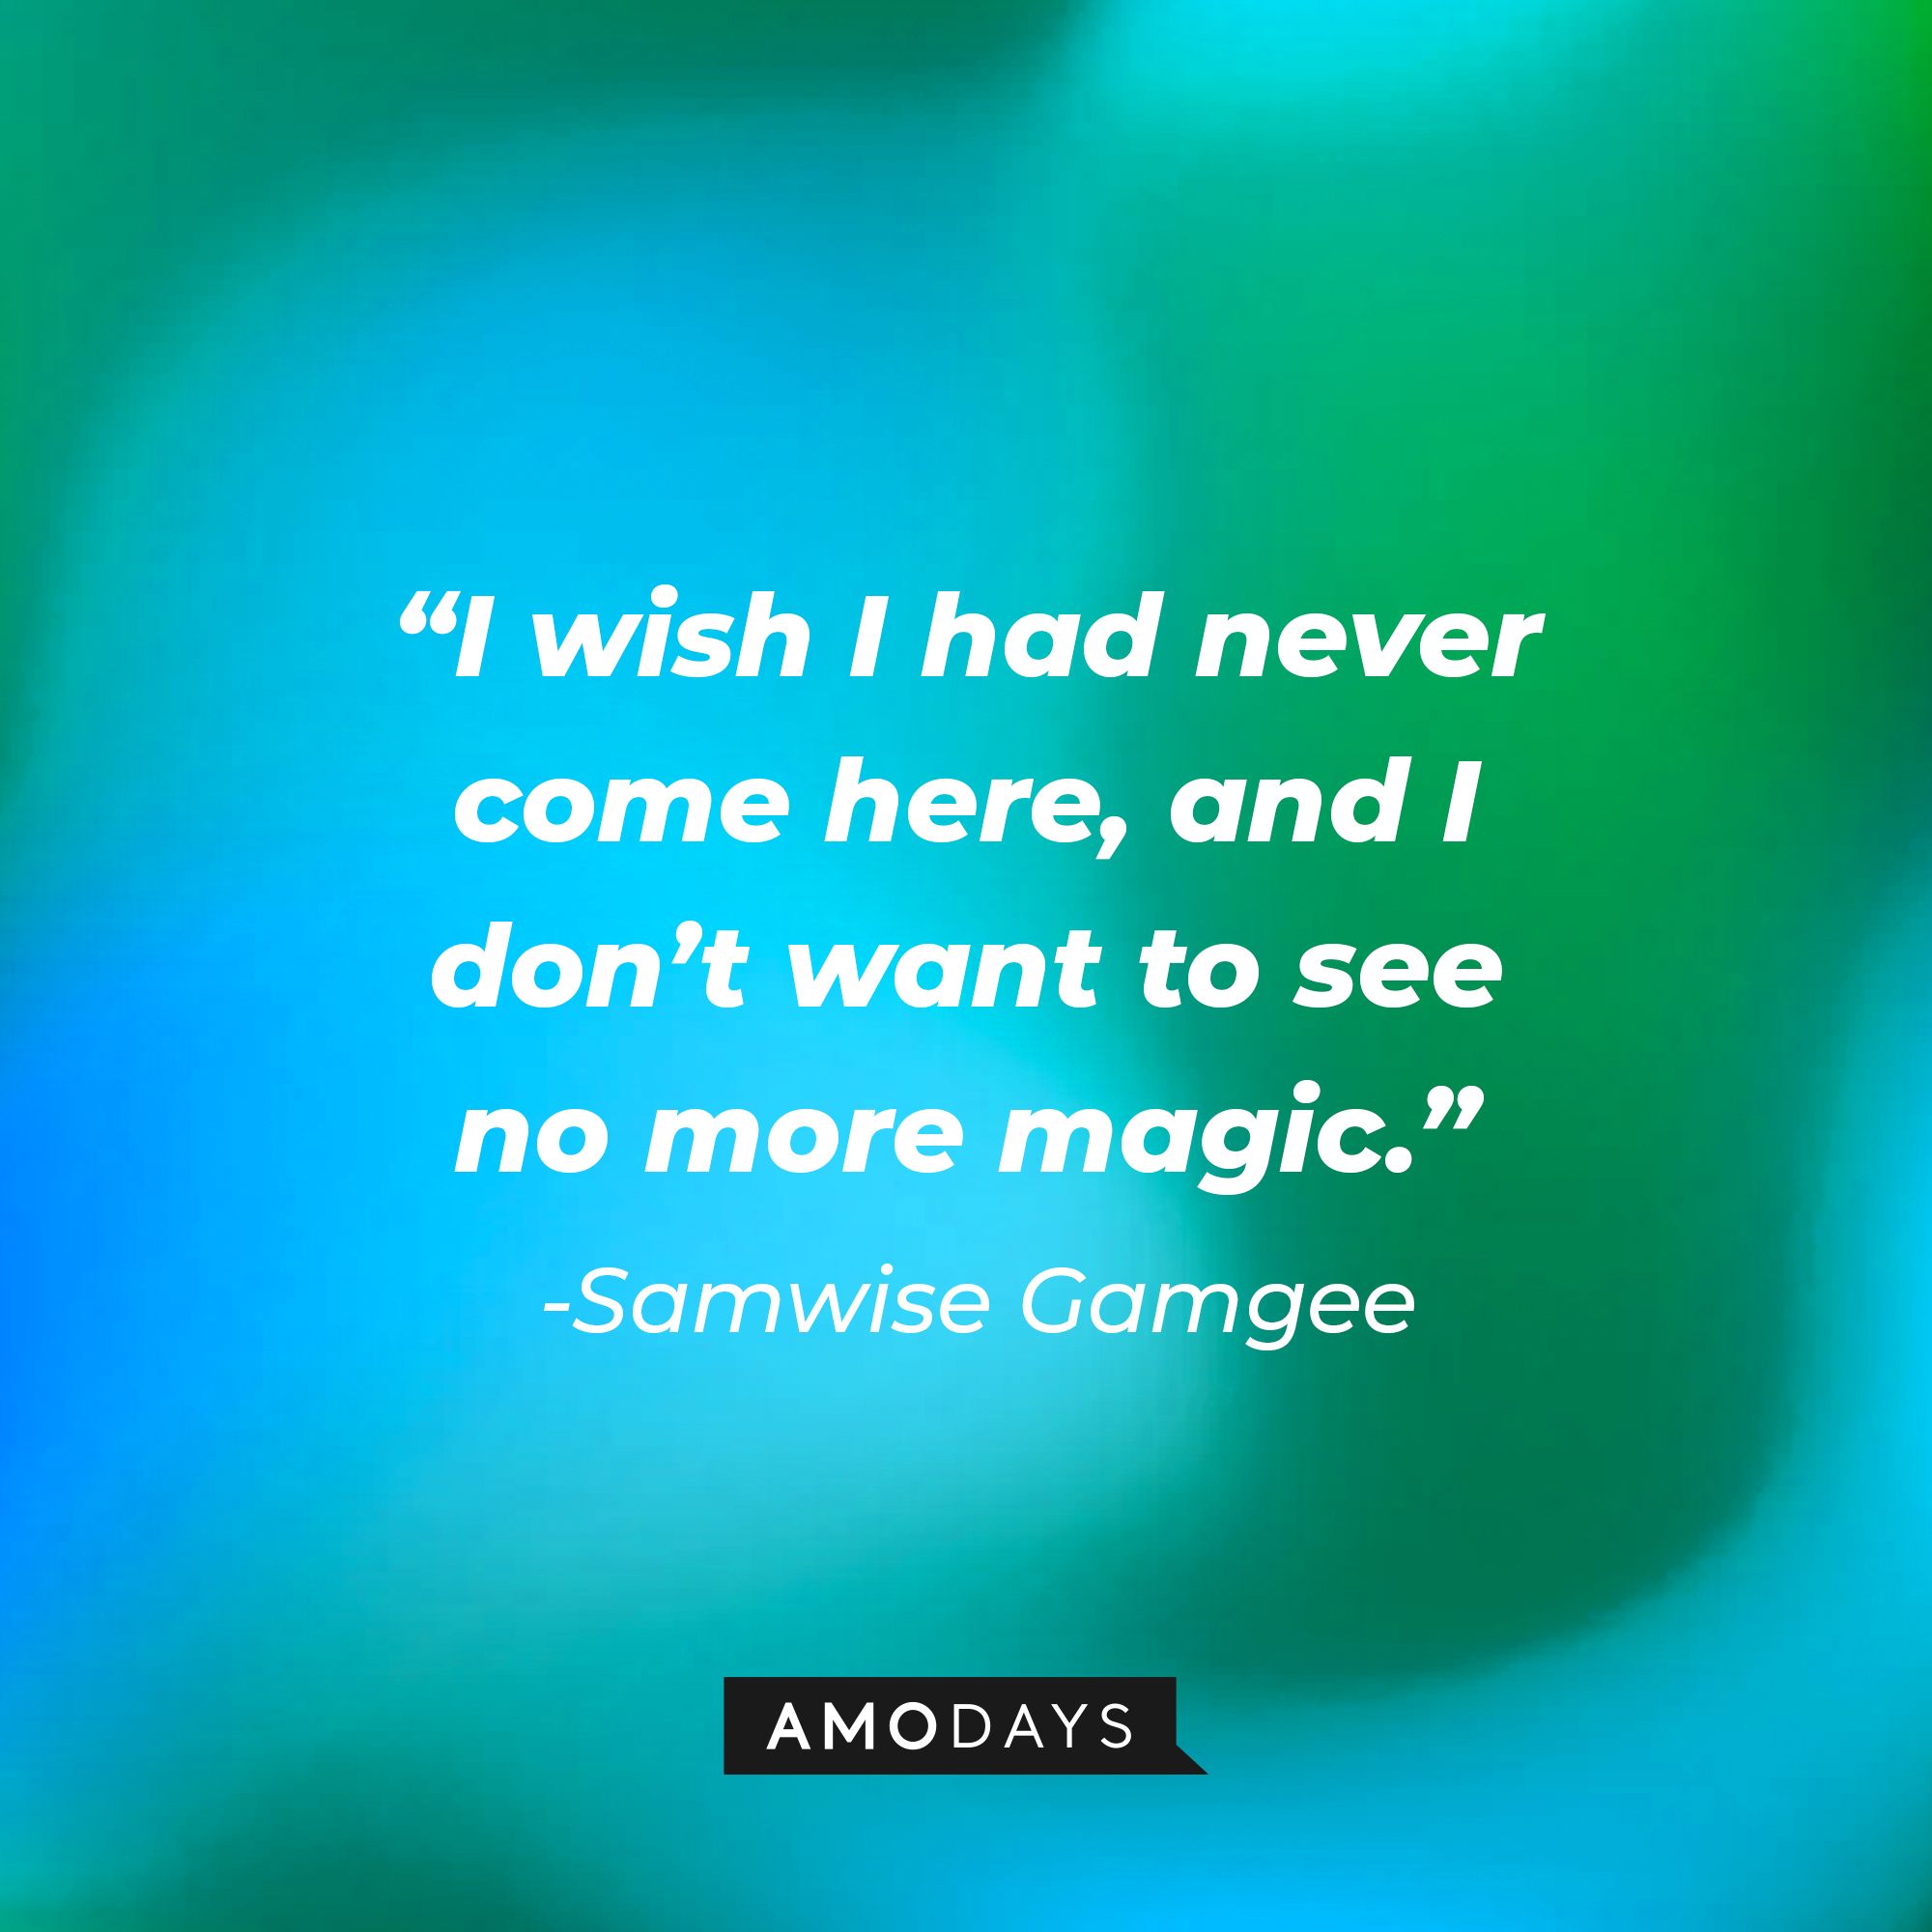 Samwise Gamgee's quote: “I wish I had never come here, and I don’t want to see no more magic." | Source: Amodays